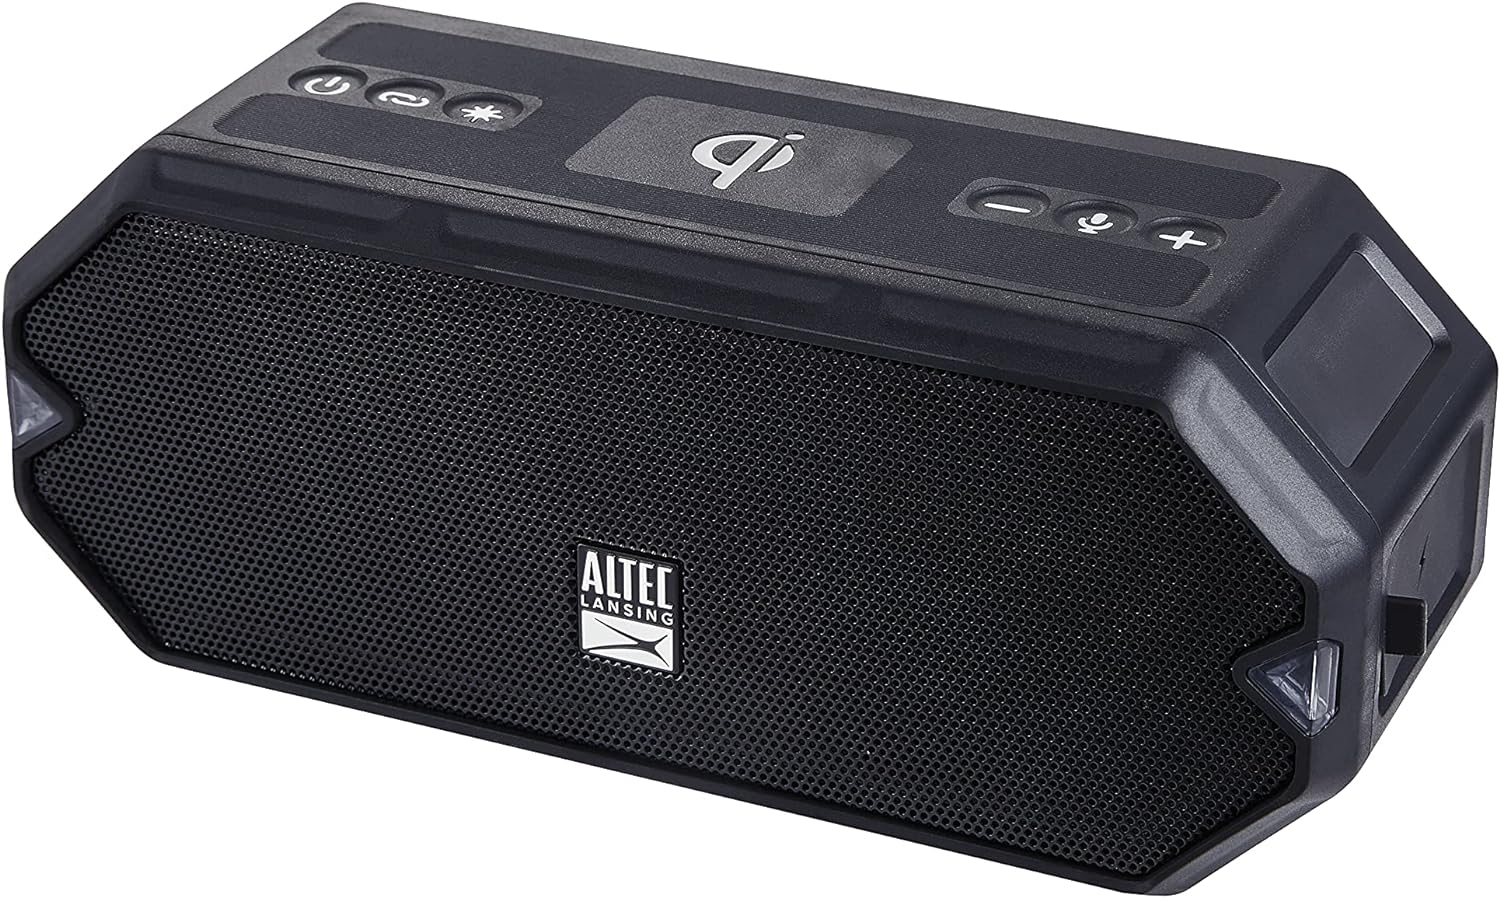 Altec Lansing HydraBlast Wireless Portable Bluetooth Speaker, IP67 Waterproof for Parties, USB C Rechargeable Outdoor Speakers with Built in Phone Charger and LED Lights, 20 Hour Playtime